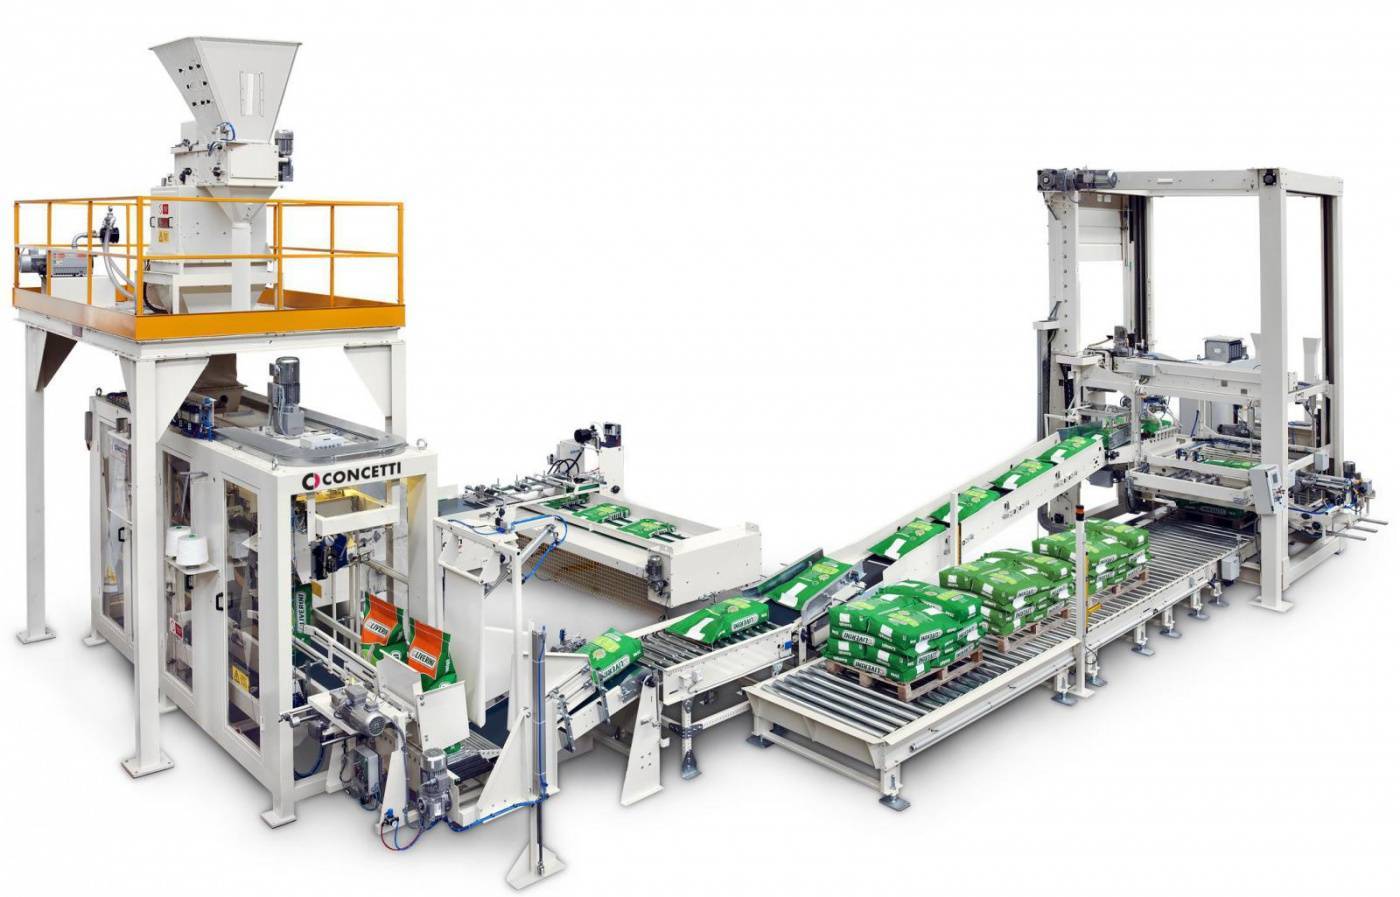 Concetti at Victam International 2019 The focus this year is on bagging machines for vitamin and premixed supplement